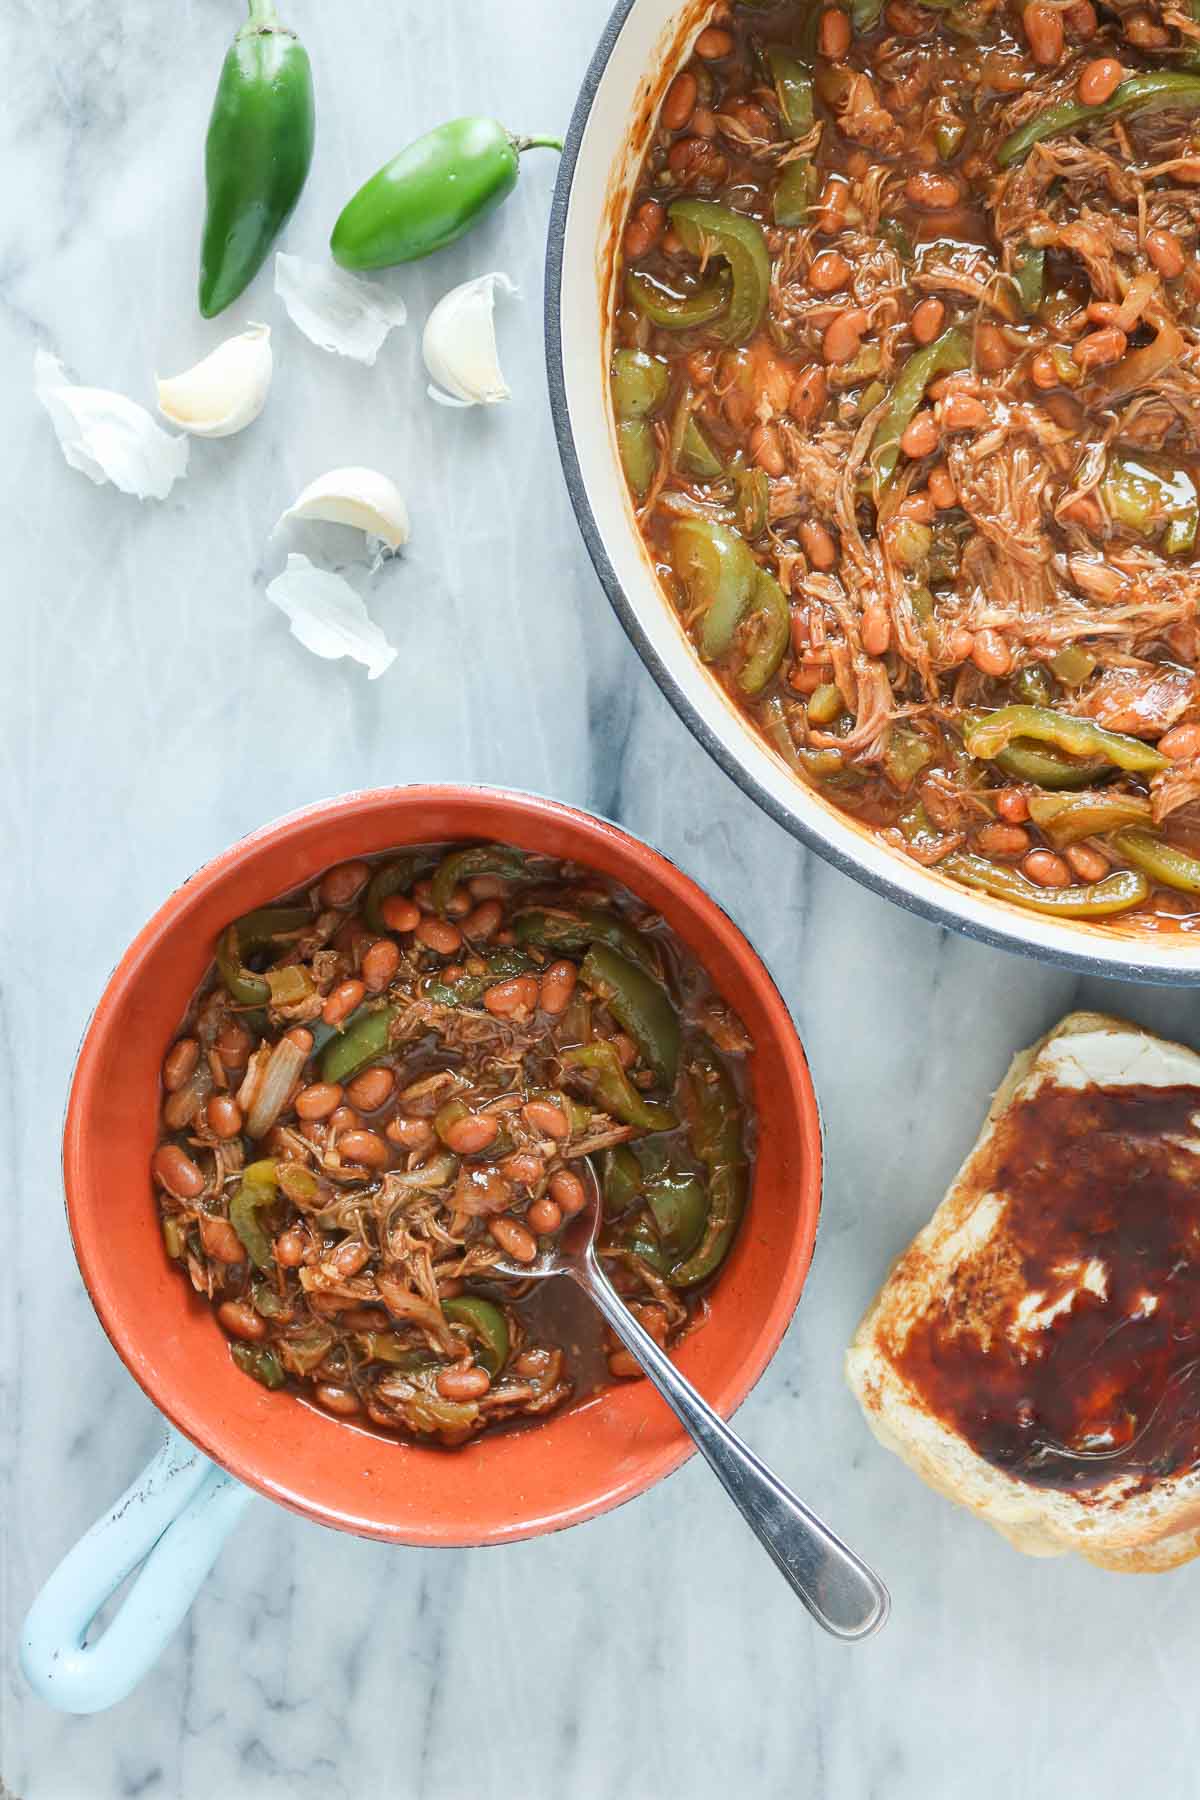 Pulled pork and beans, some in a serving bowl and some in a pan.